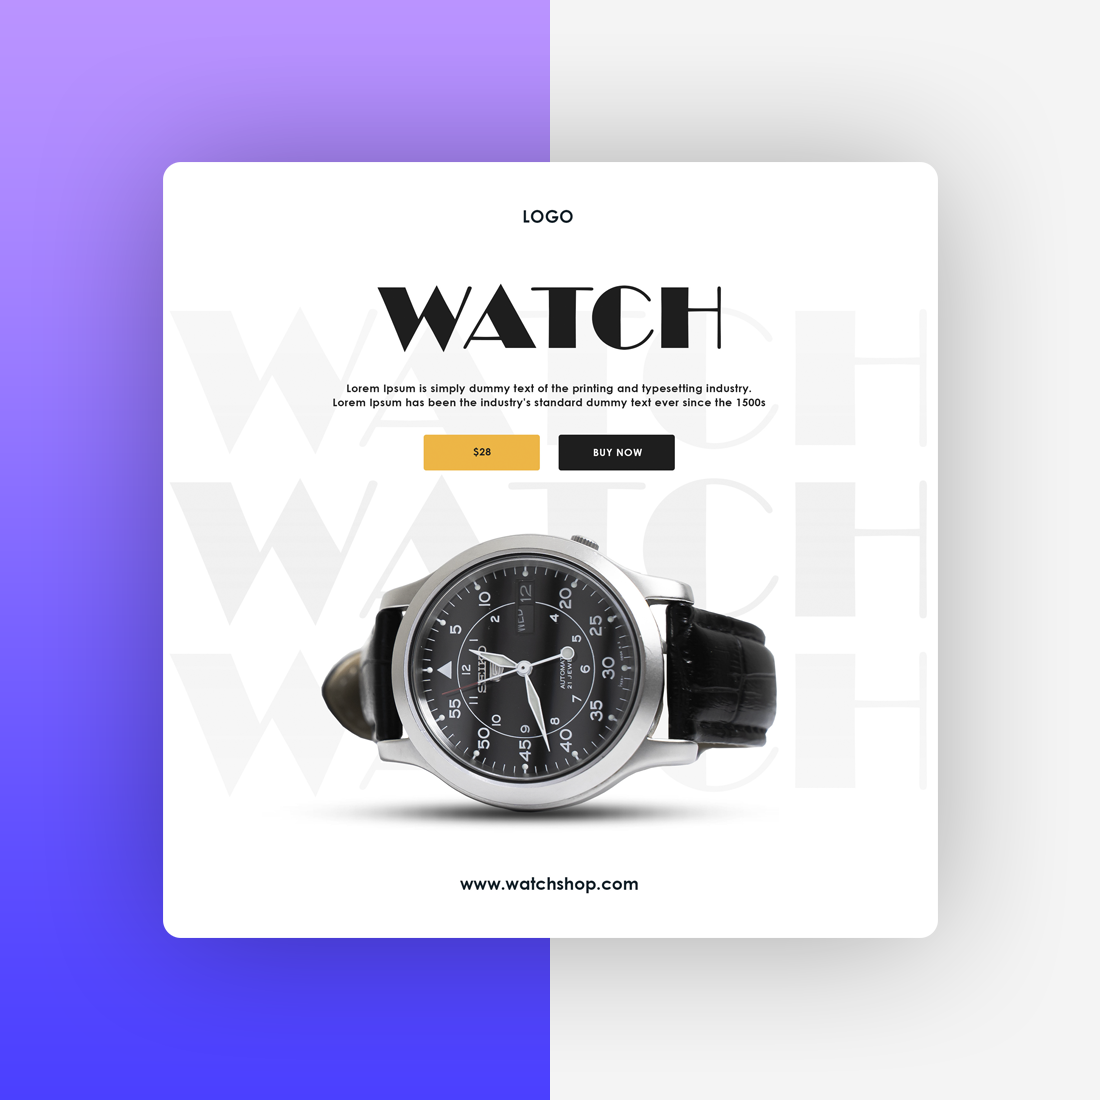 Watch Advertising Social Media Poster Design cover image.